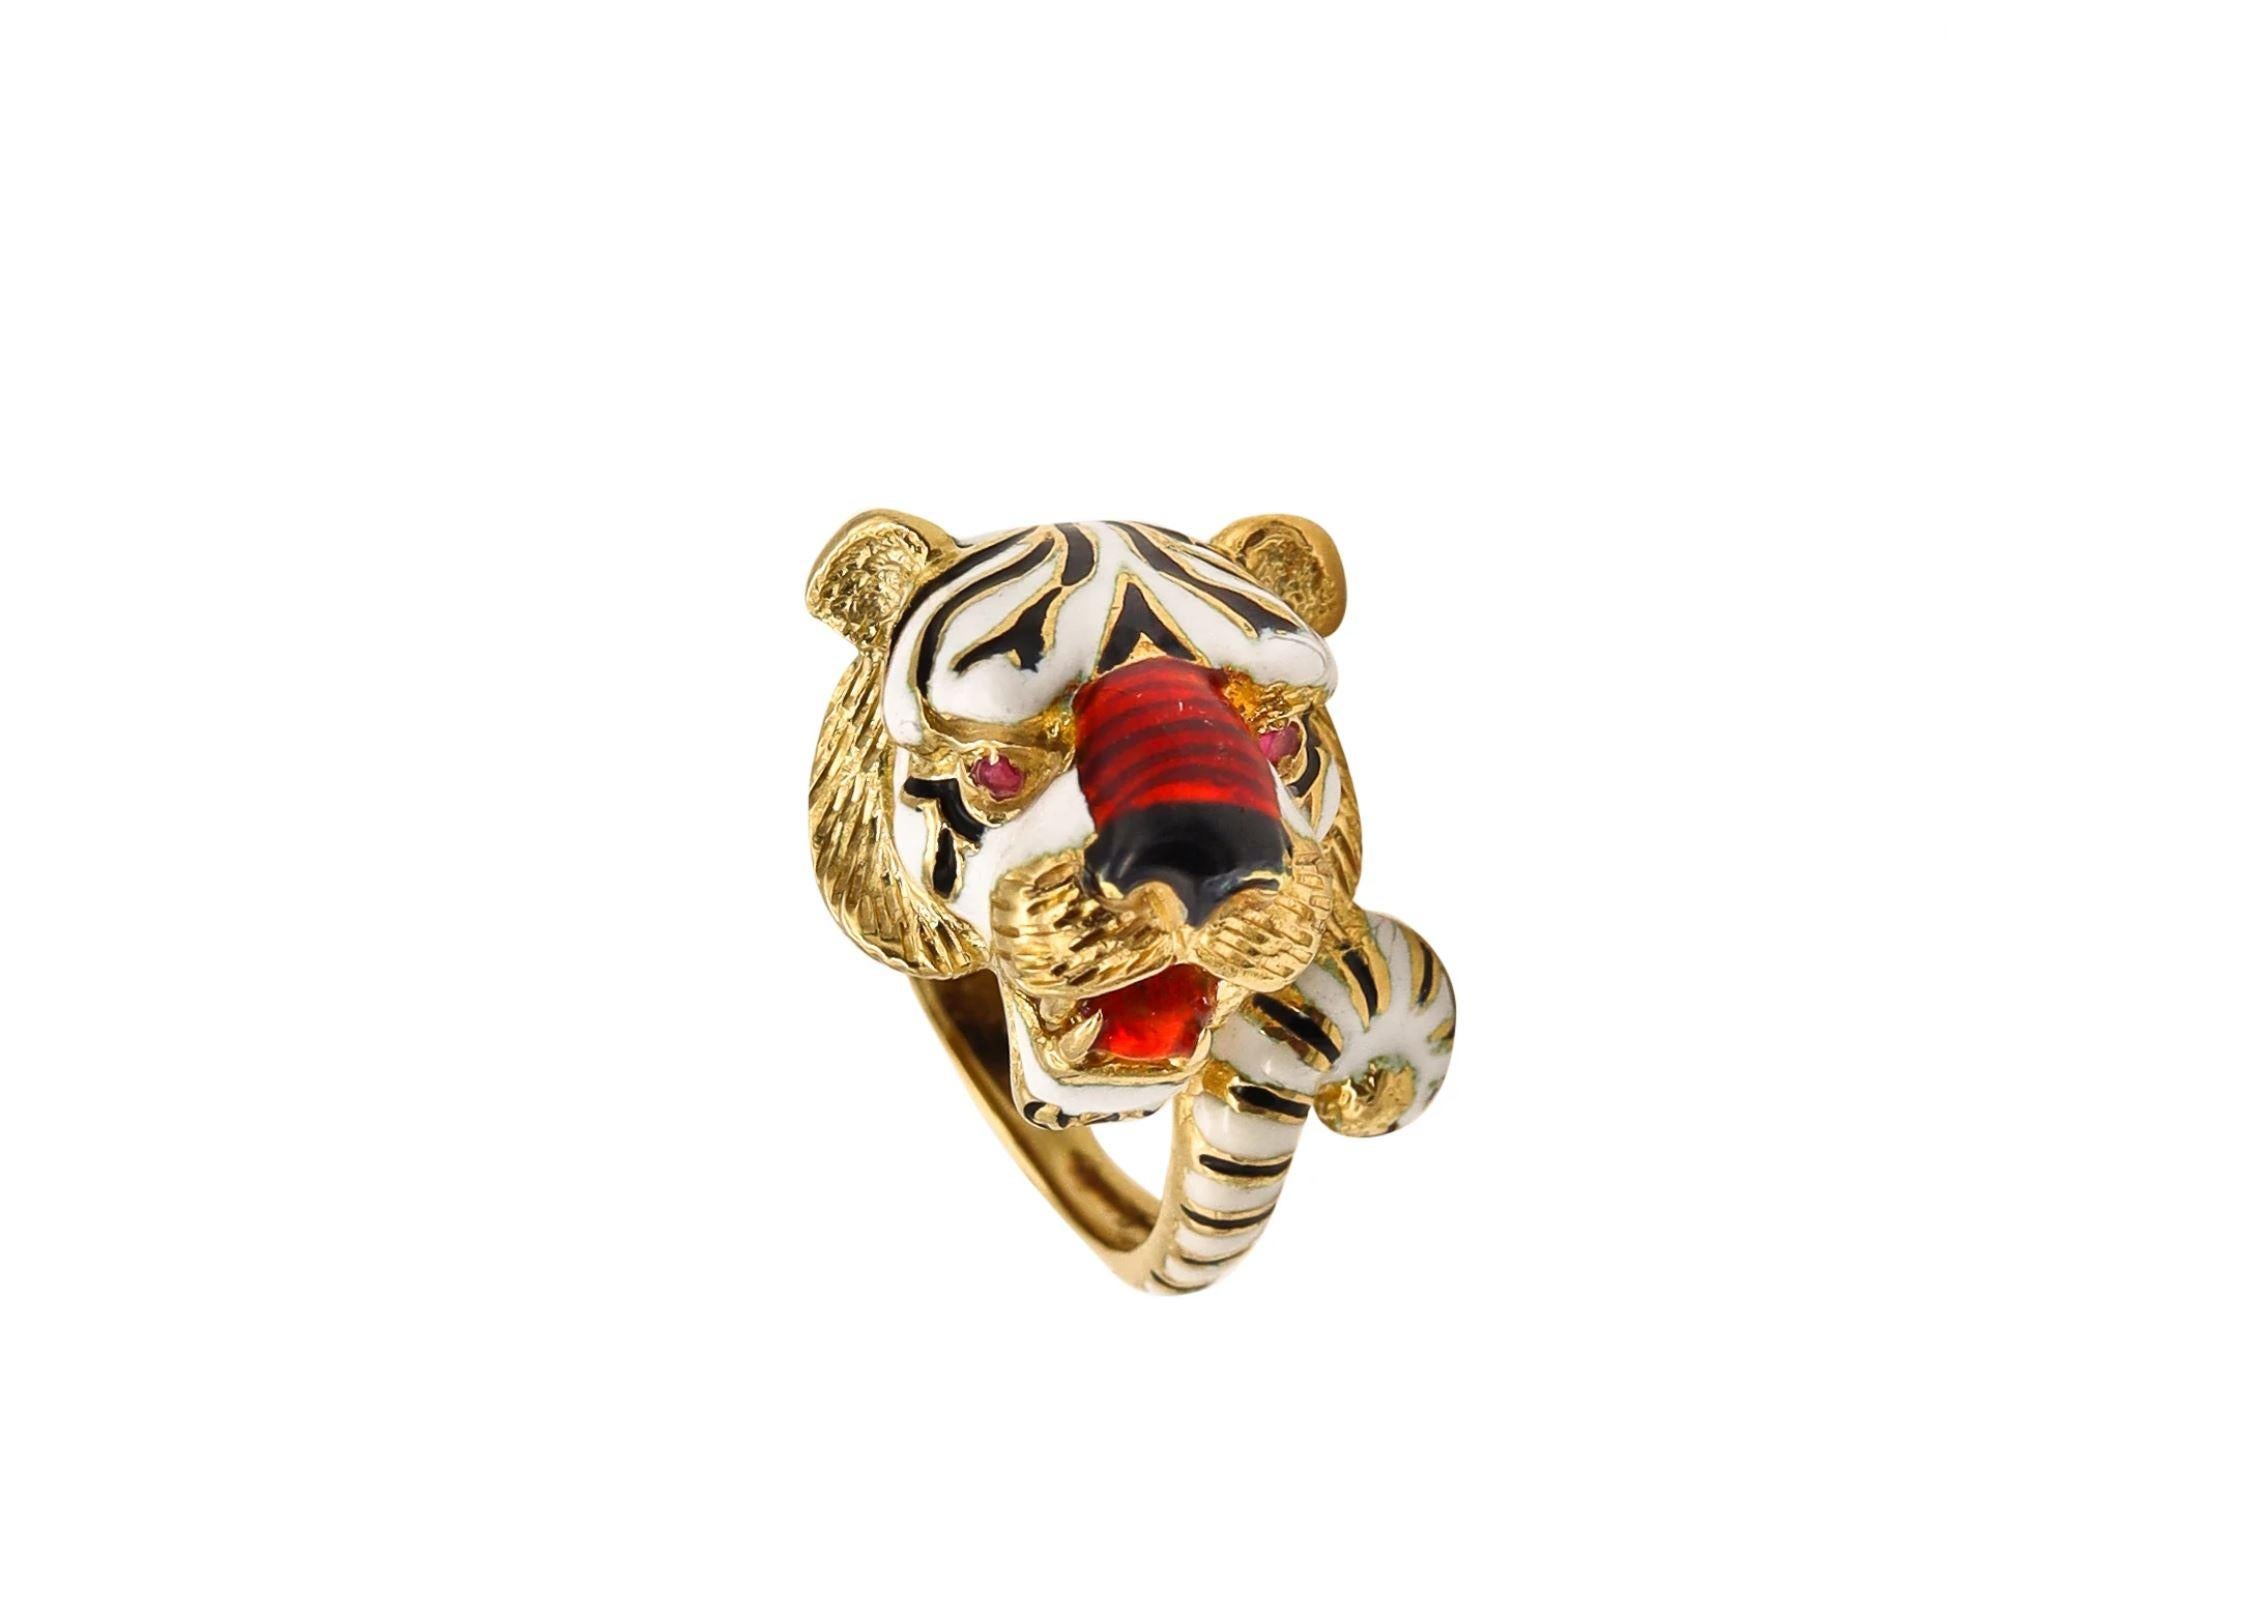 Frascarolo Milano Enameled Tiger Cocktail Ring in 18Kt Yellow Gold with Rubies 3